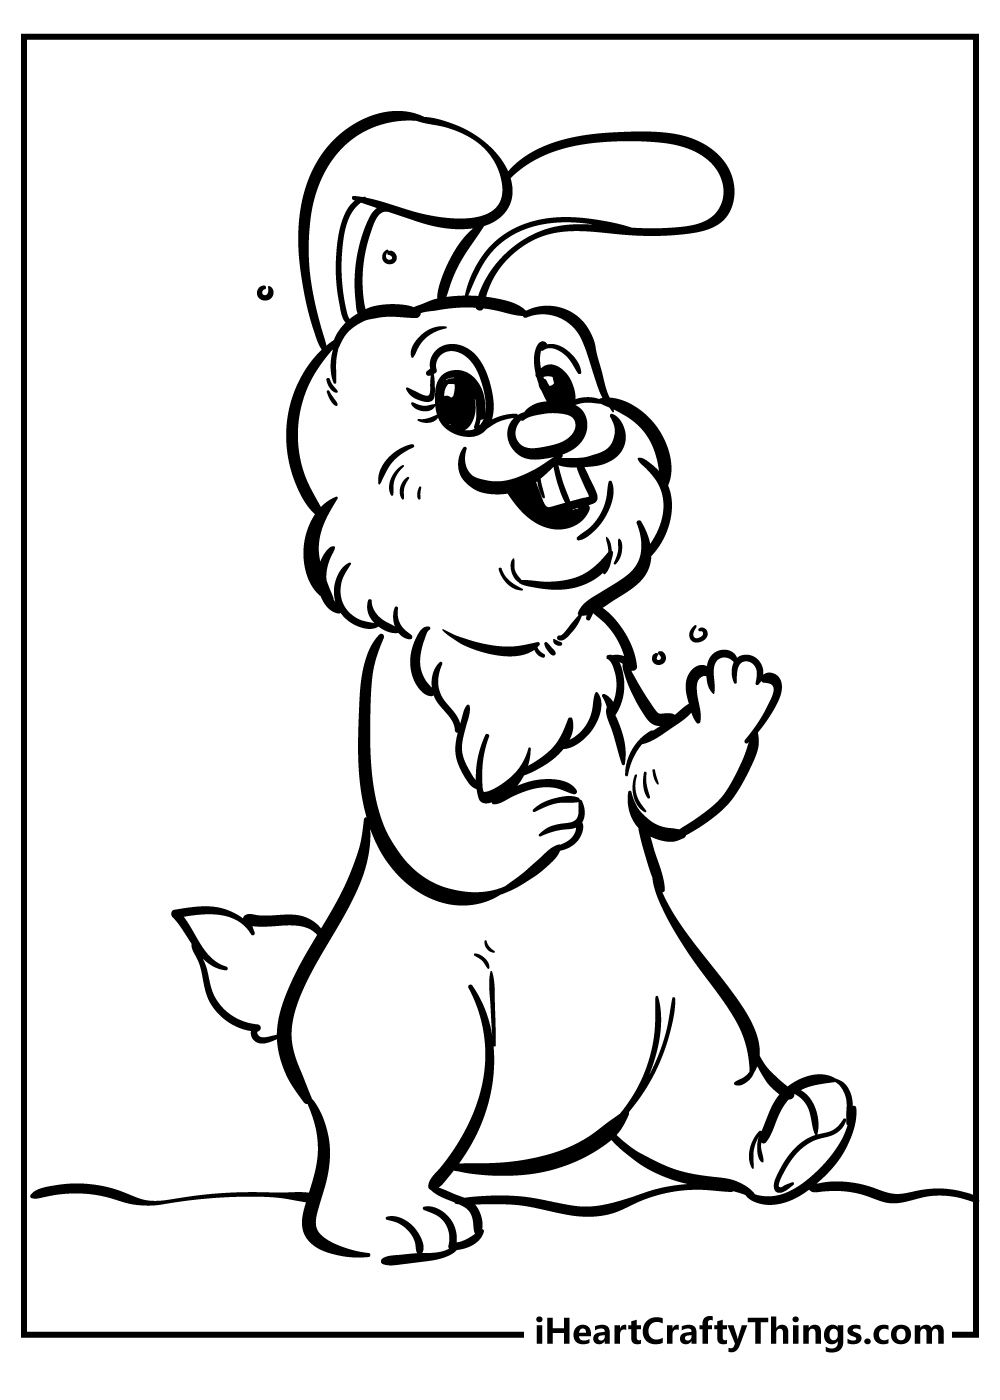 Peter Rabbit coloring pages free printable